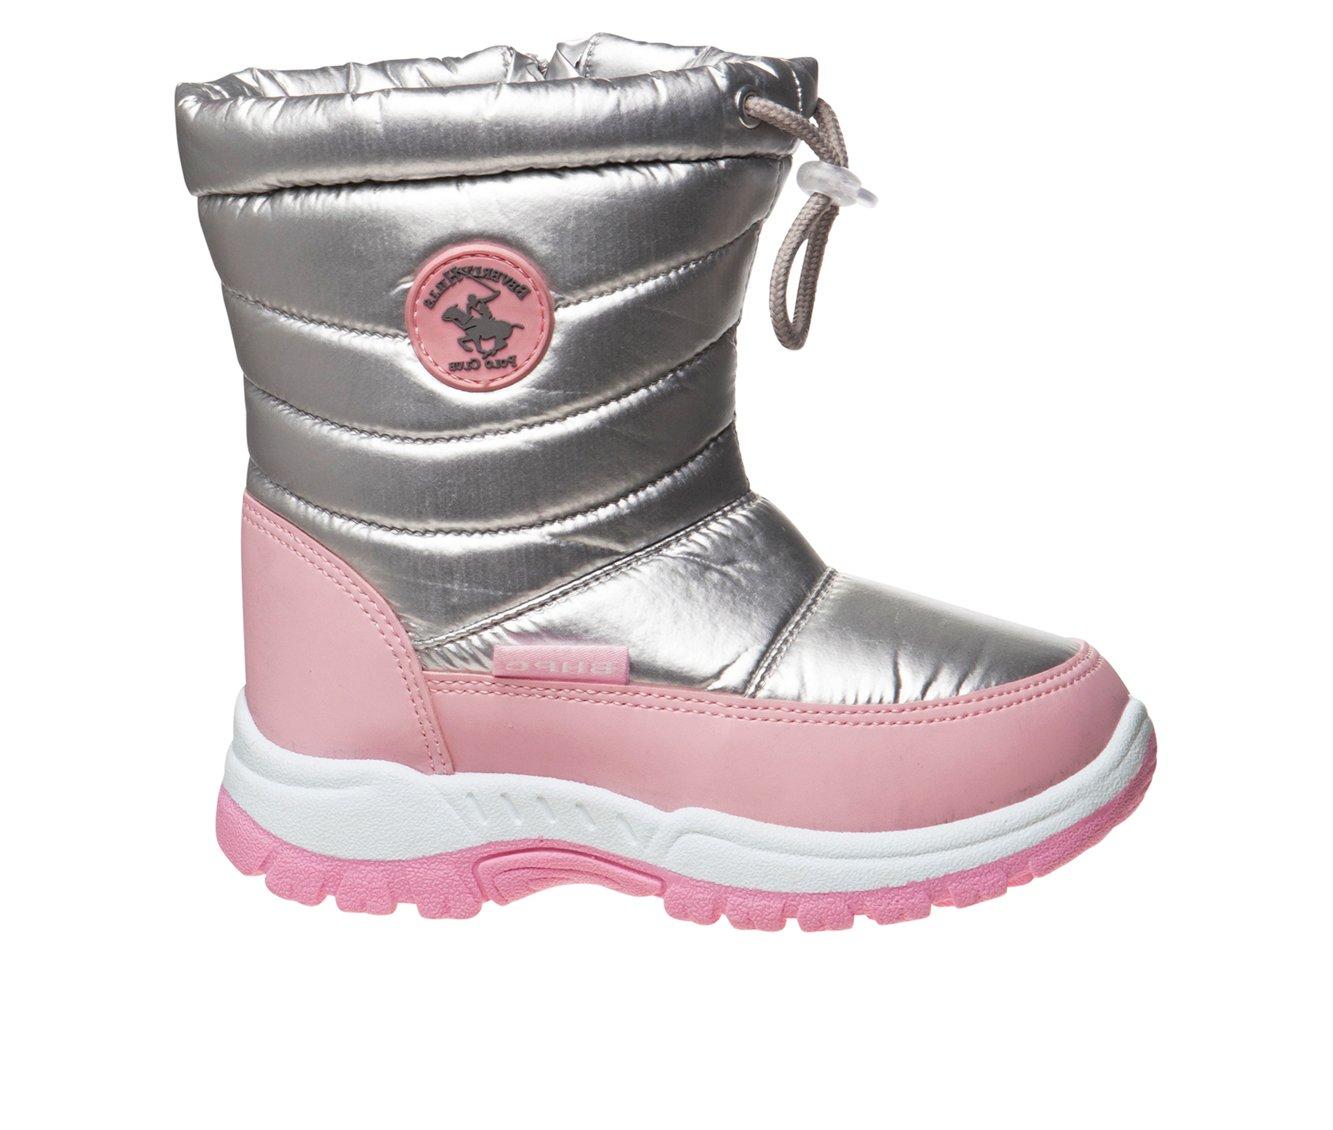 Girls' Beverly Hills Polo Club Little Kid & Big Kid Lucille Winter Boots